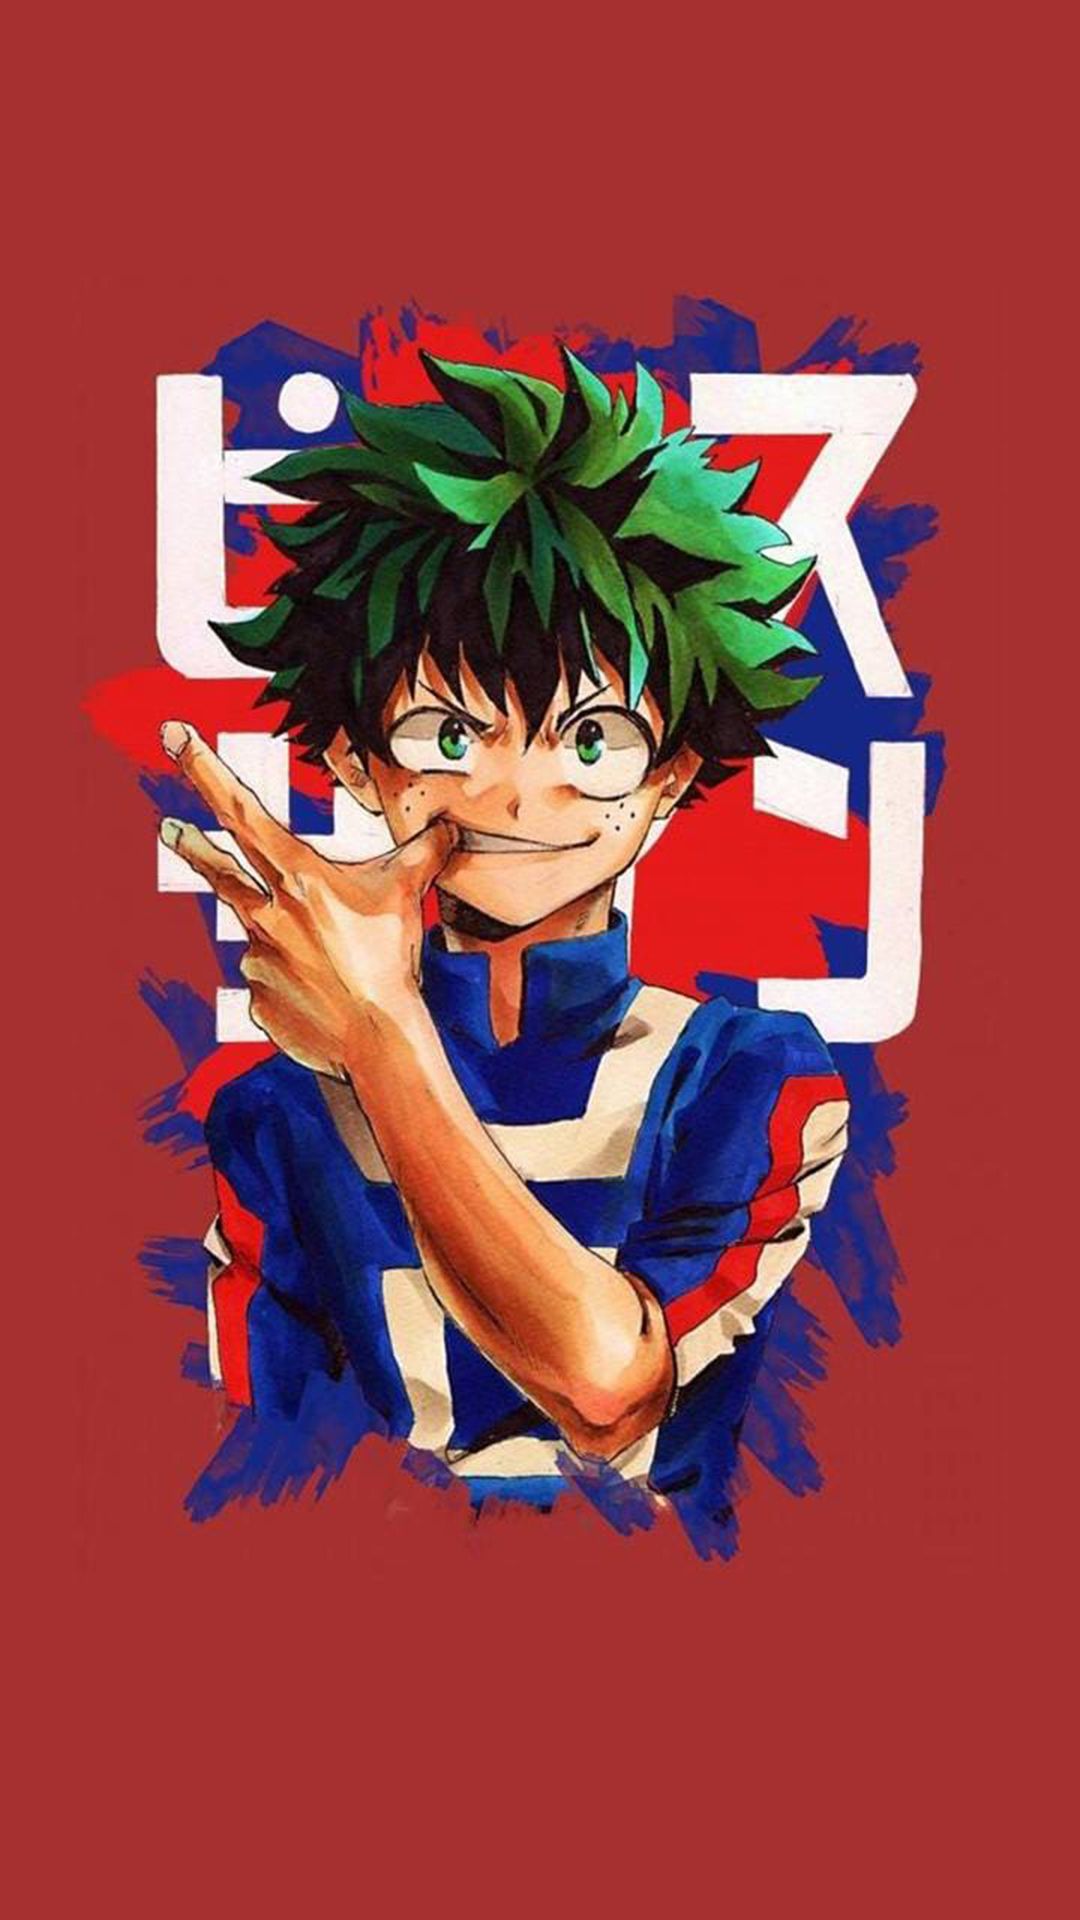 My Hero Academia Wallpaper iPhone with high-resolution 1080x1920 pixel. You can use this wallpaper for your iPhone 5, 6, 7, 8, X, XS, XR backgrounds, Mobile Screensaver, or iPad Lock Screen - Deku